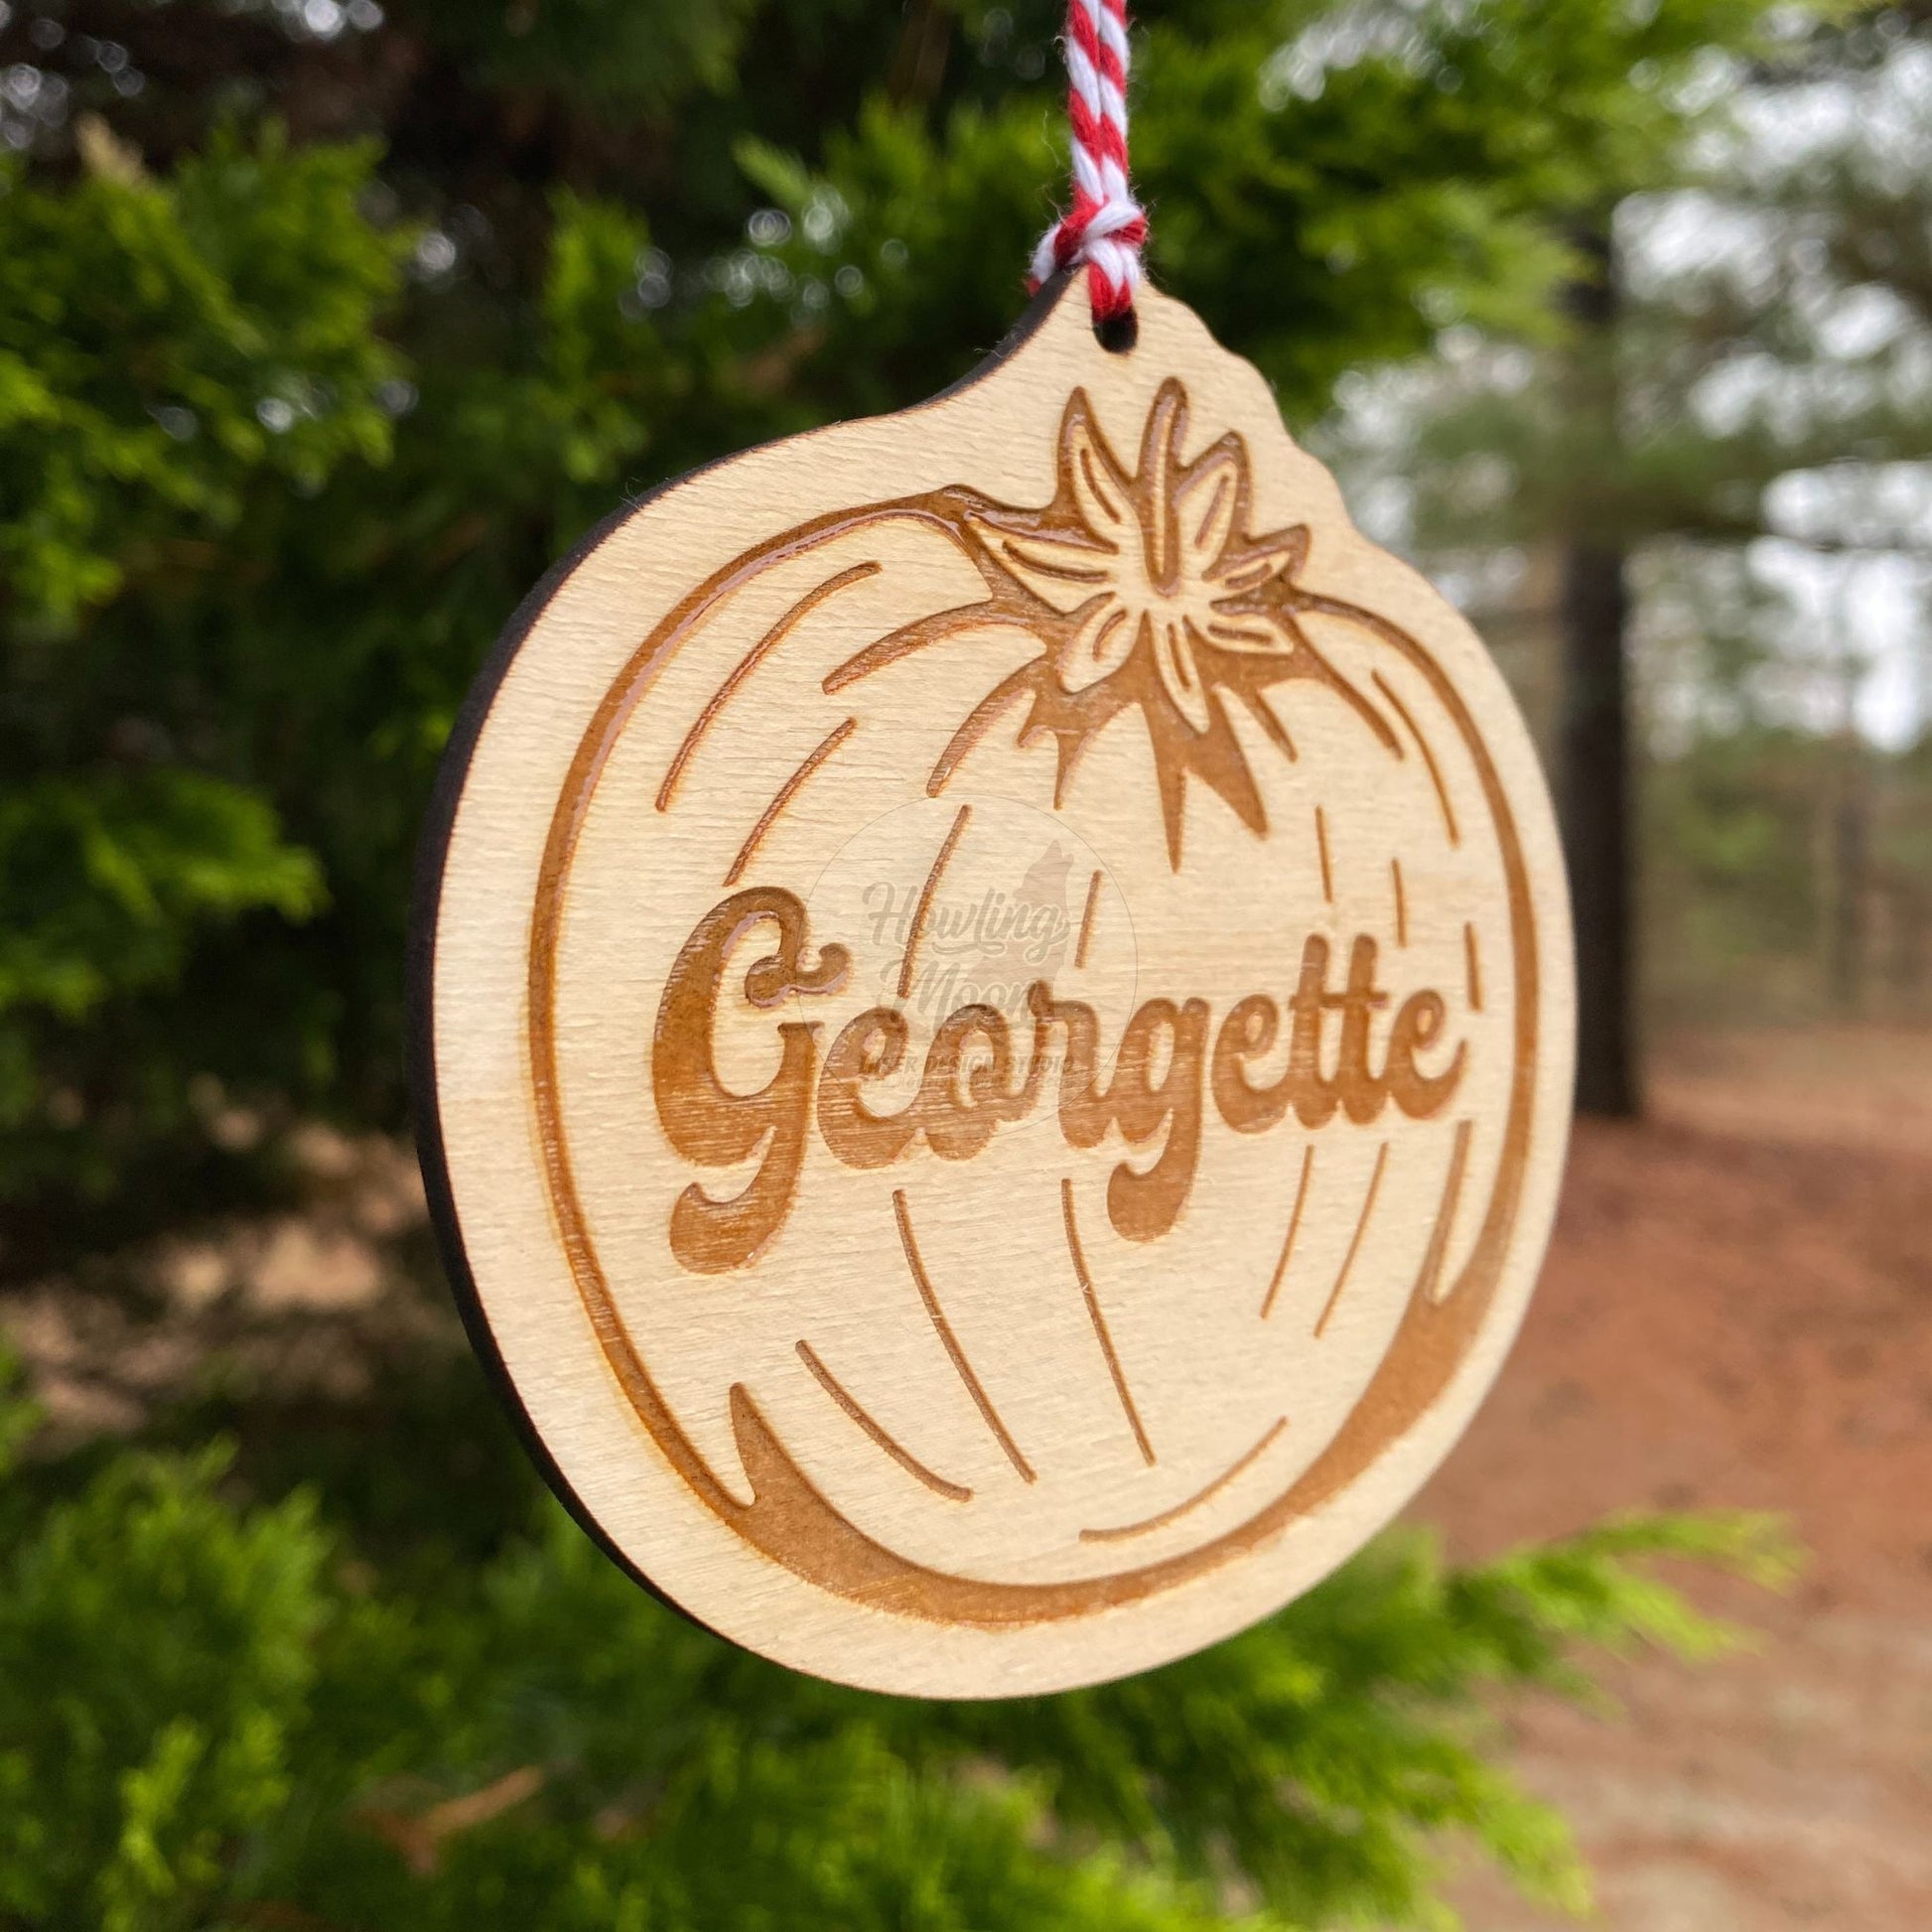 Close up of Personalized Tomato Ornament from Howling Moon Laser Design in Virginia, USA